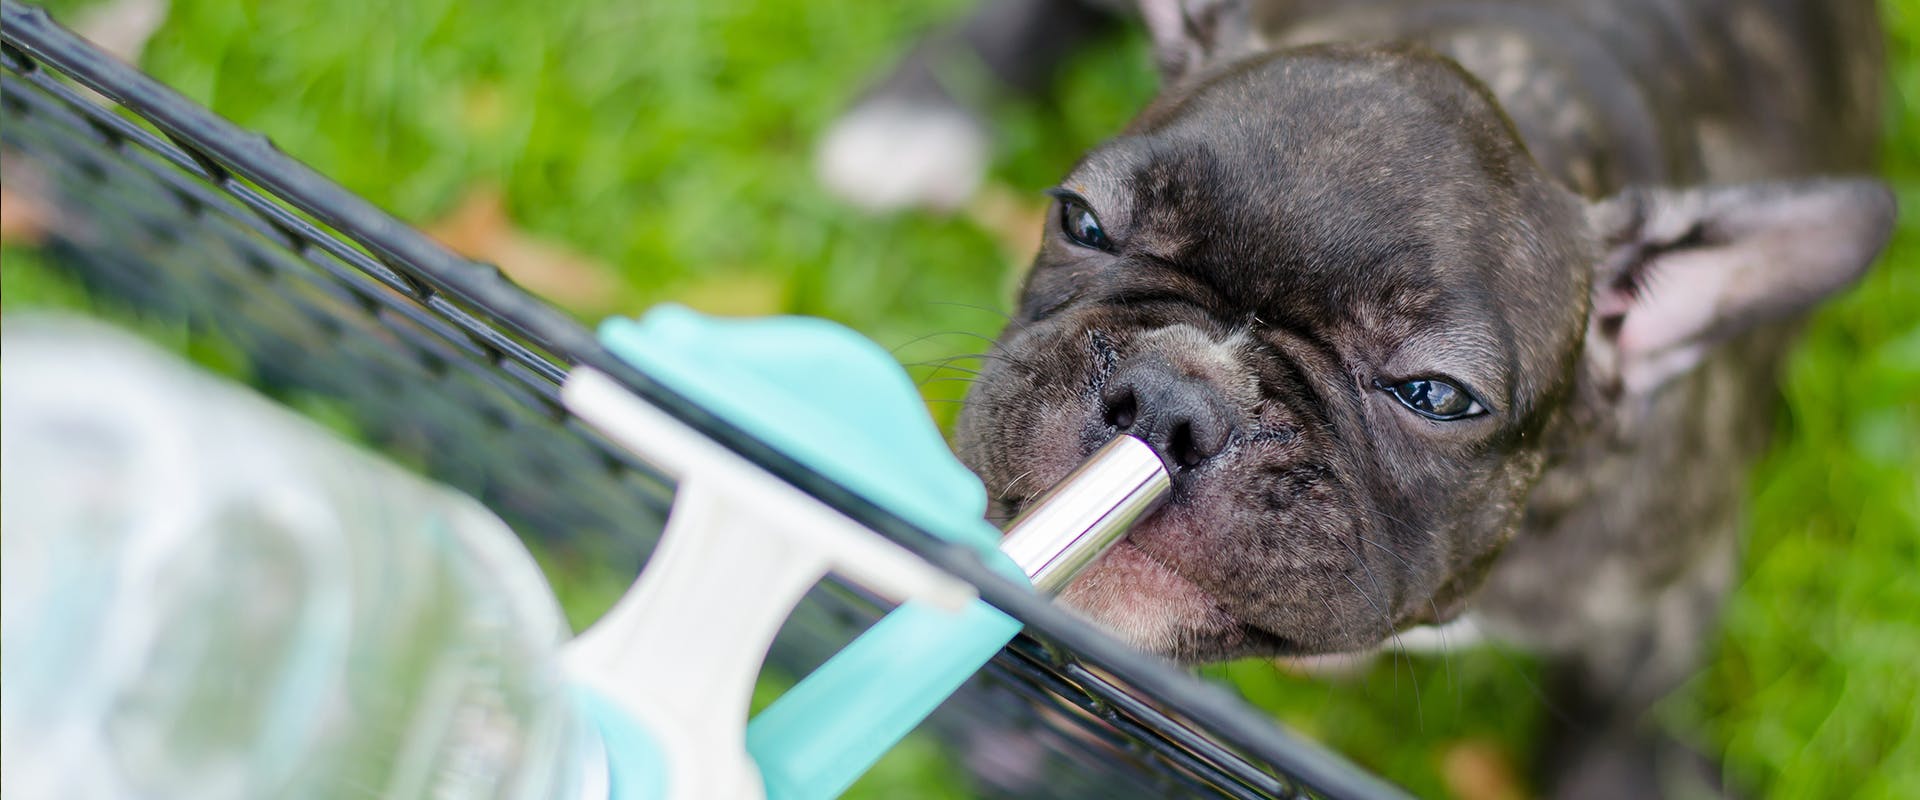 A small French Bulldog drinking from a water bottle, attached to its dog crate